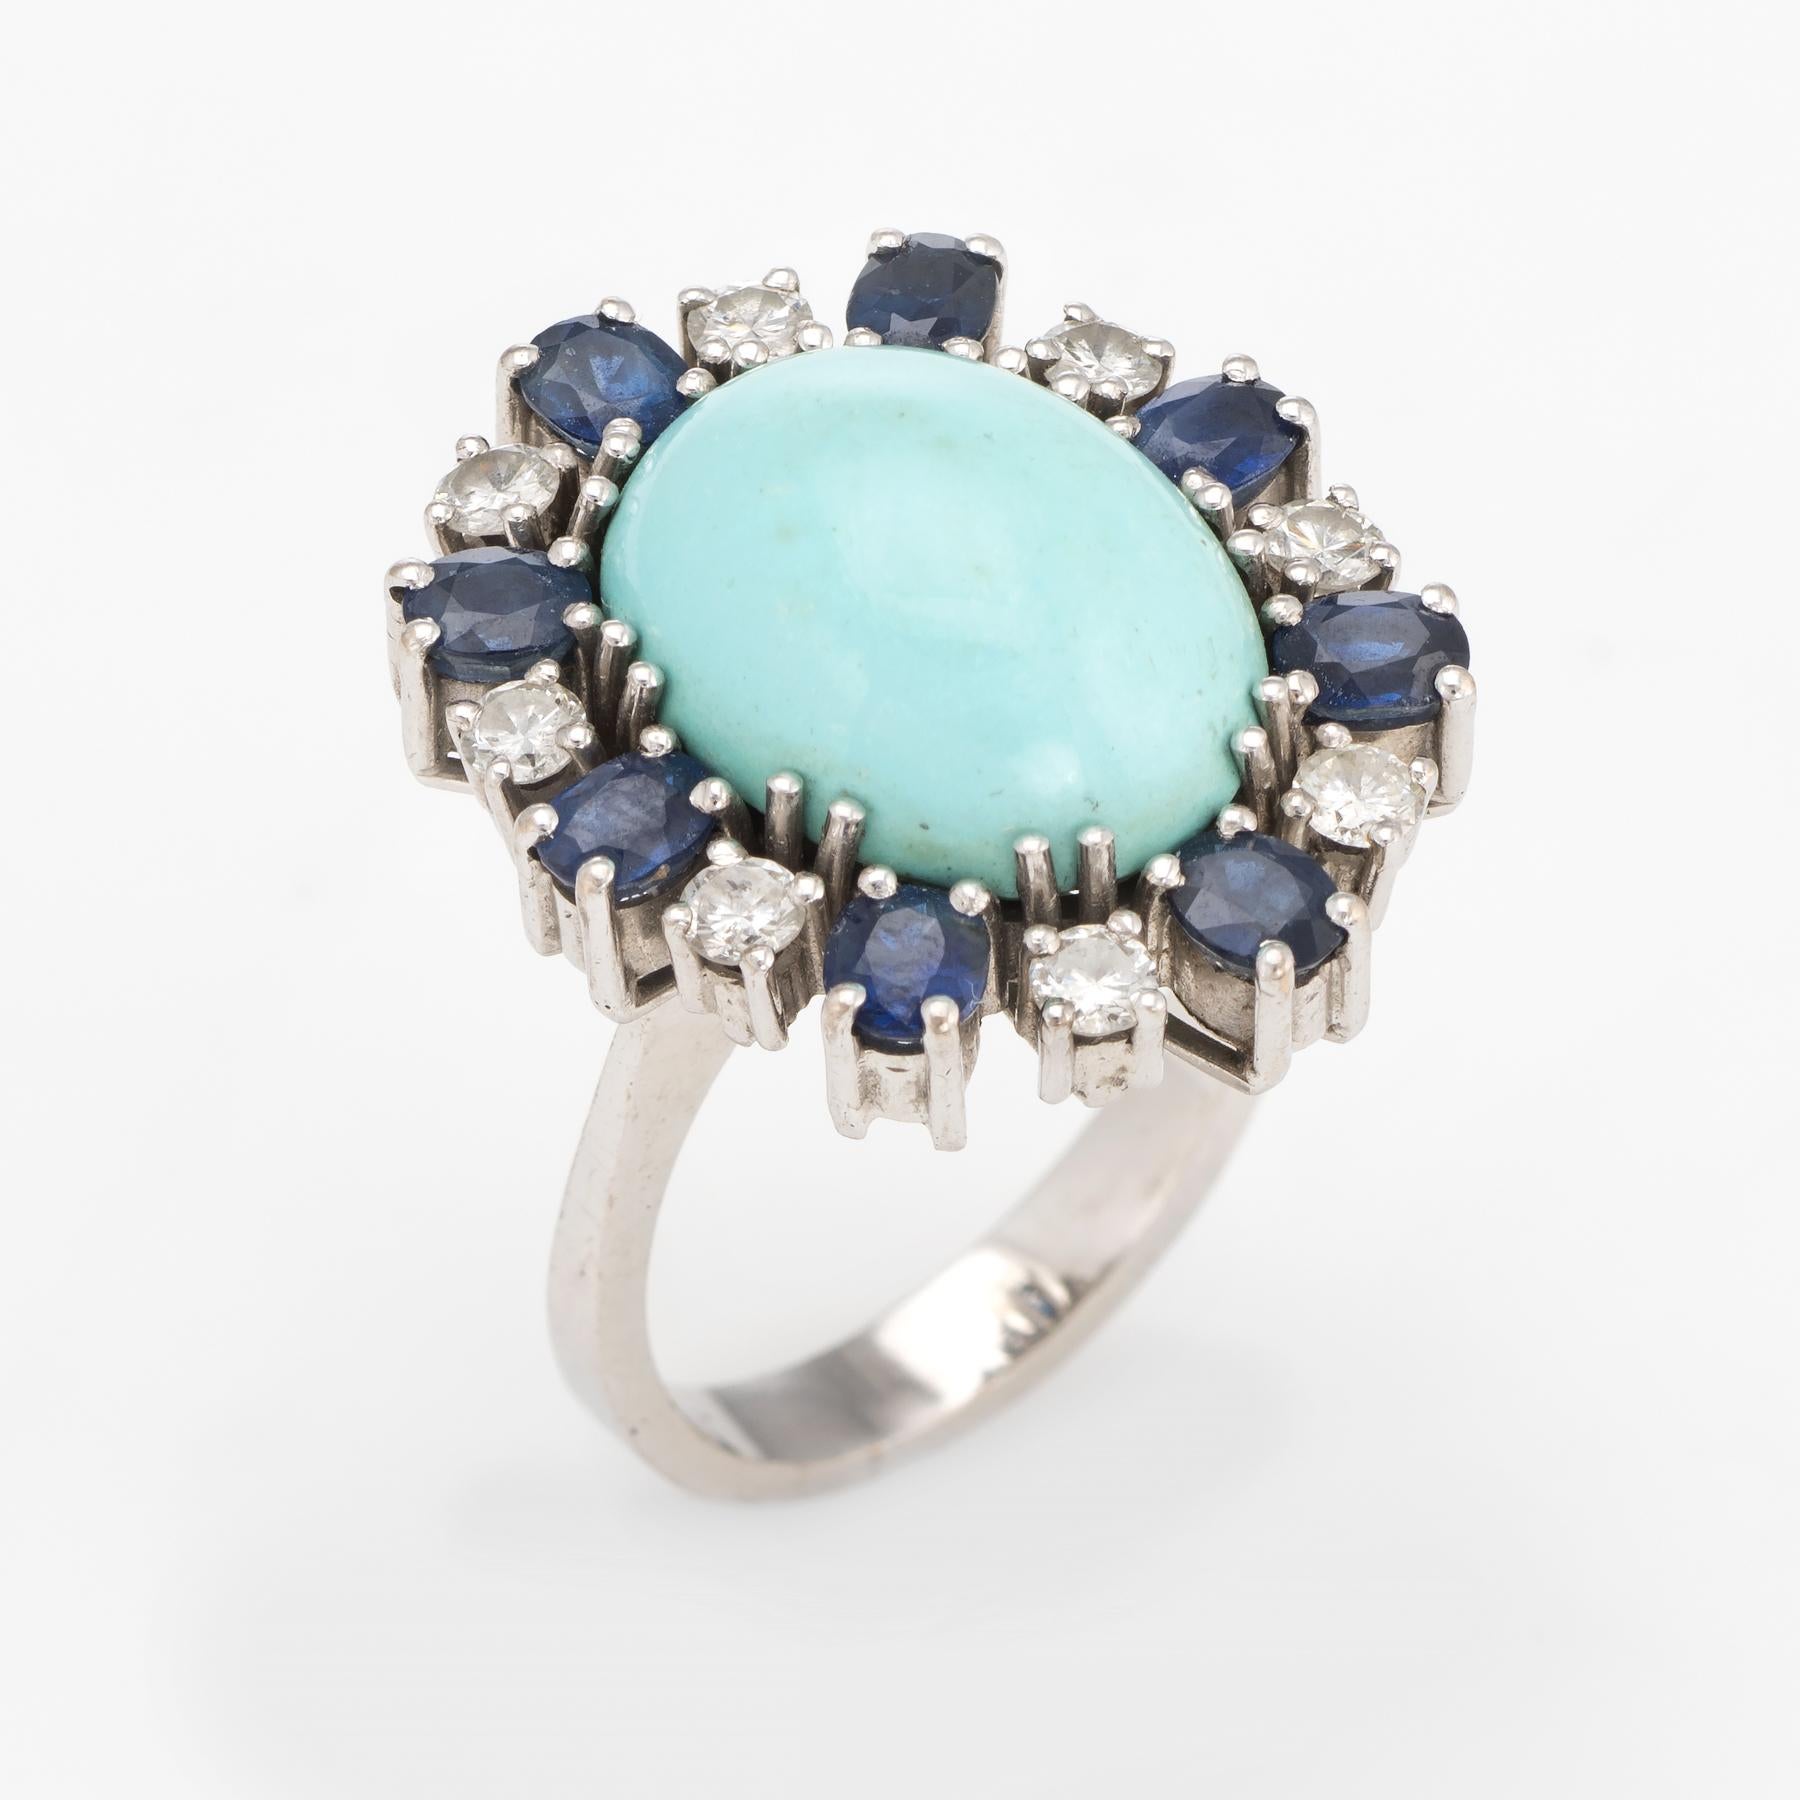 Distinct & stylish egg shell blue turquoise, sapphire & diamond ring (circa 1950s to 1960s), crafted in 18 karat white gold. 

Cabochon cut Persian turquoise measures 16mm x 12mm (estimated at 7 carats), accented with 7 estimated 0.24 carat oval